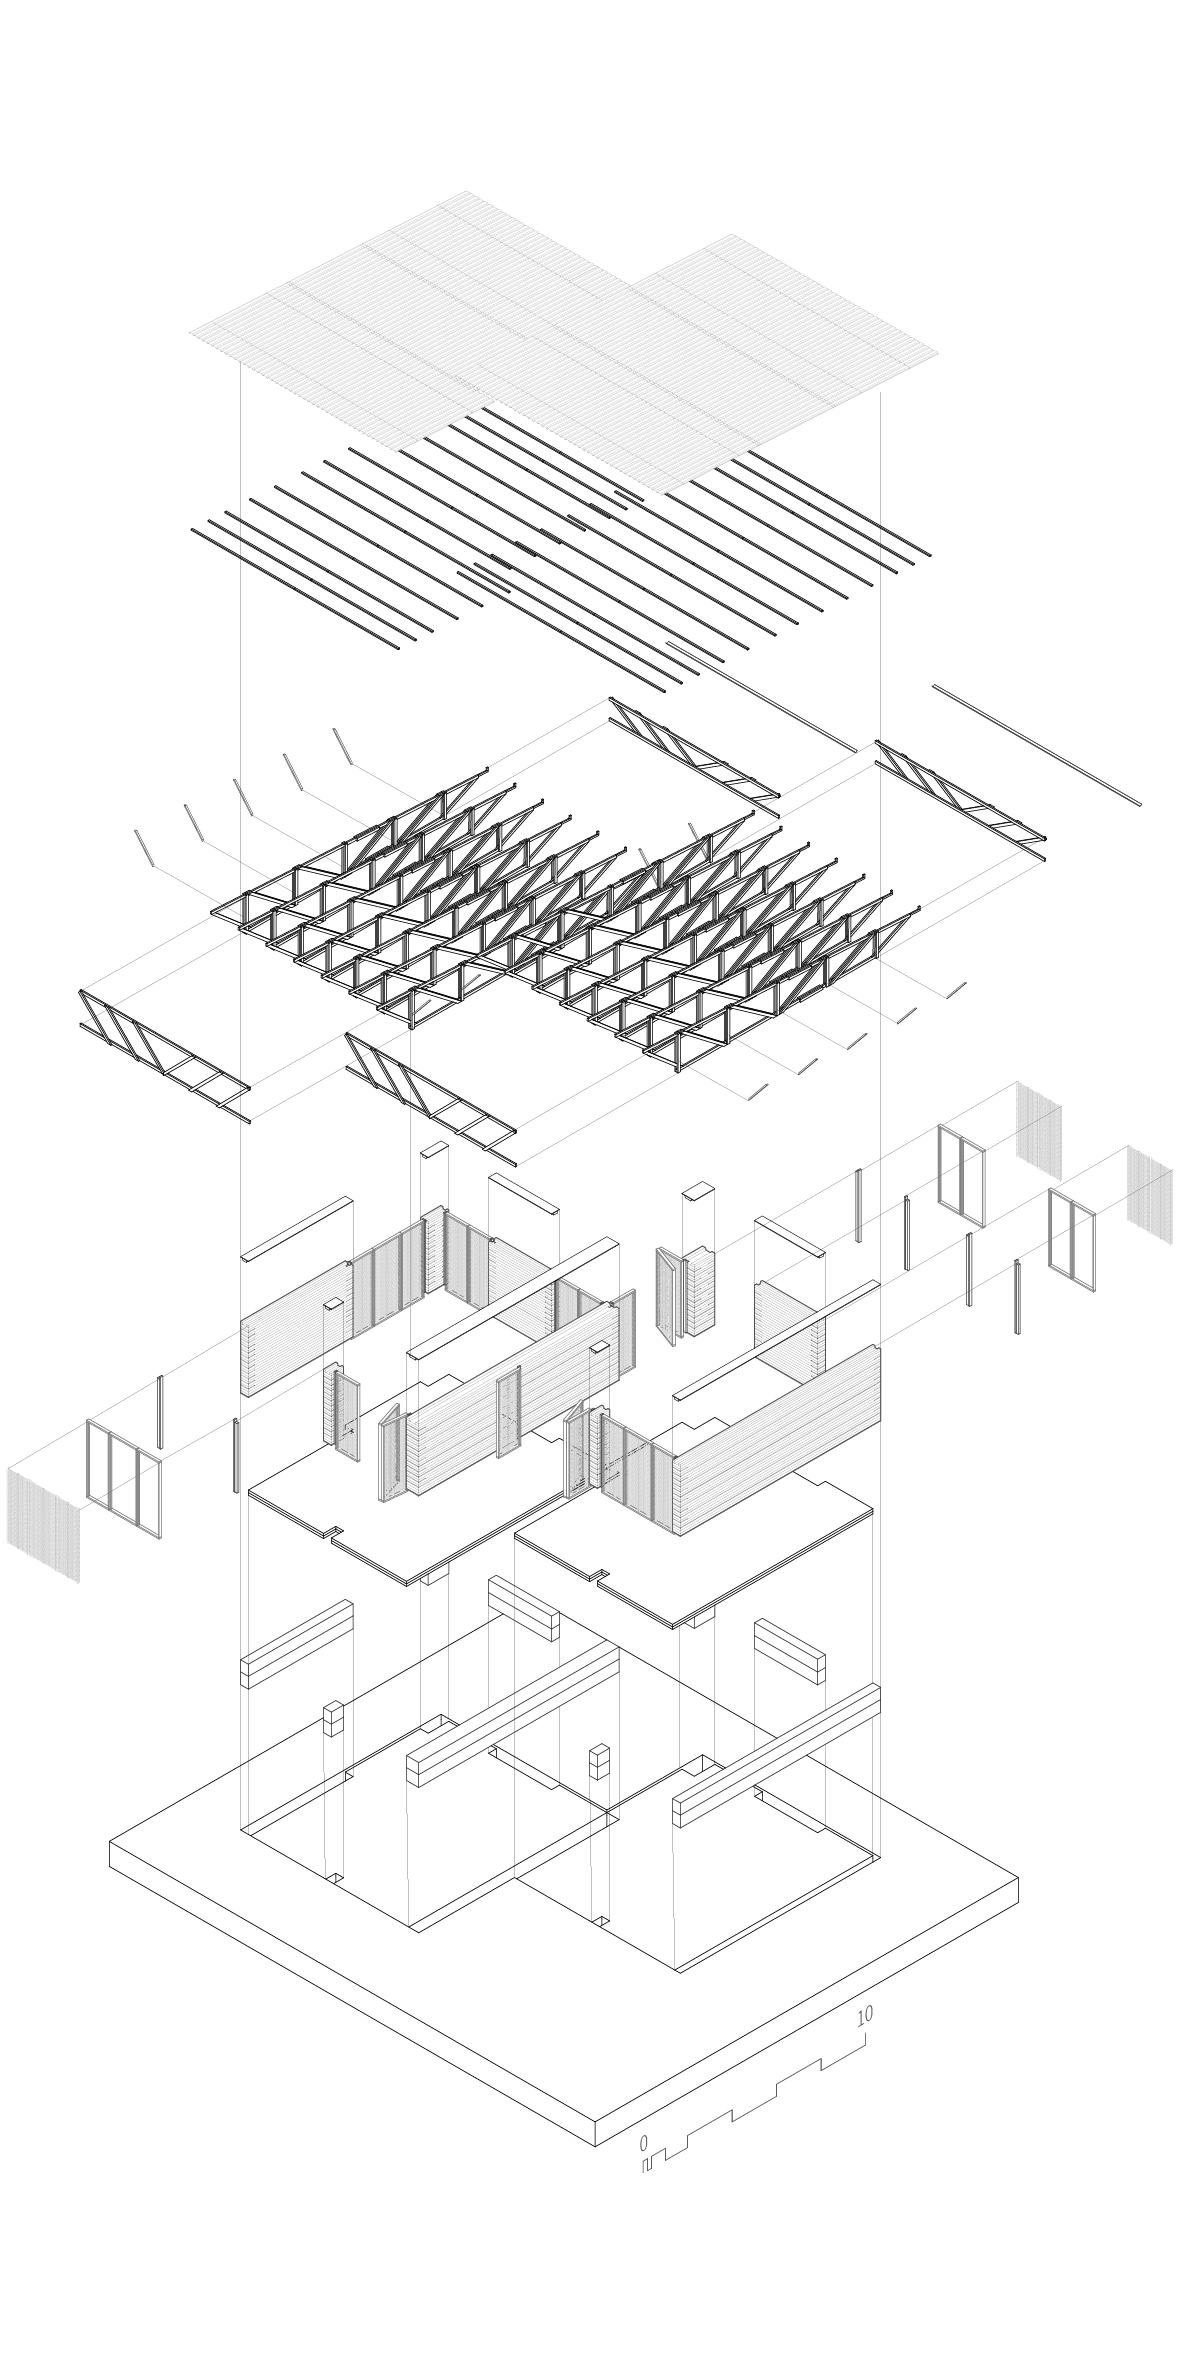 architectural explosion drawing of one classroom module